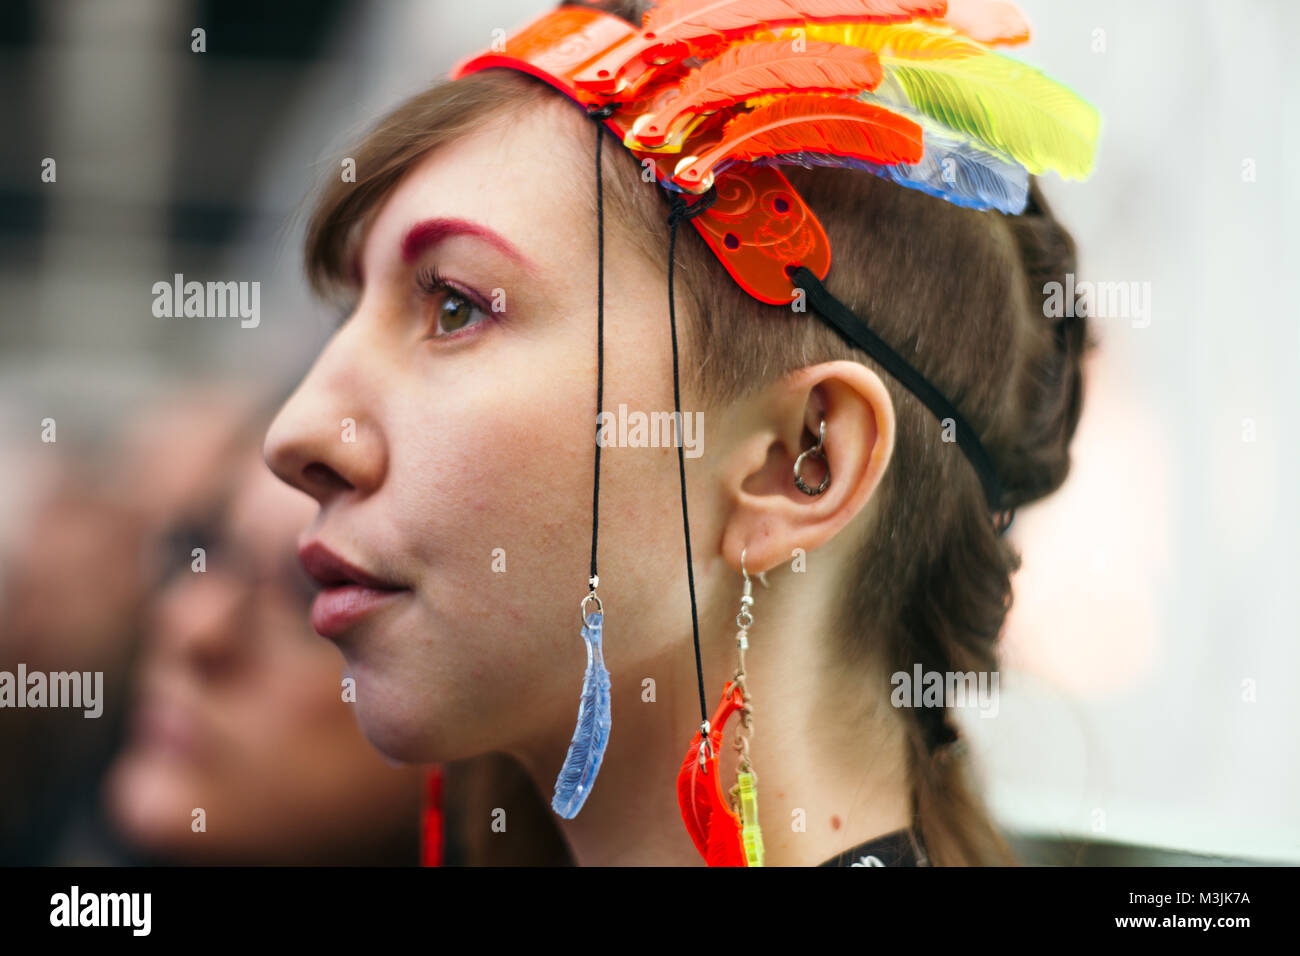 London, UK. 11th Feb, 2018. London Edge is an international trade show for hundreds of new alternative culture, fashion, footwear and lifestyle brands. Bloggers,Traders, and models attended. Credit: Simon King/Alamy Live News Stock Photo